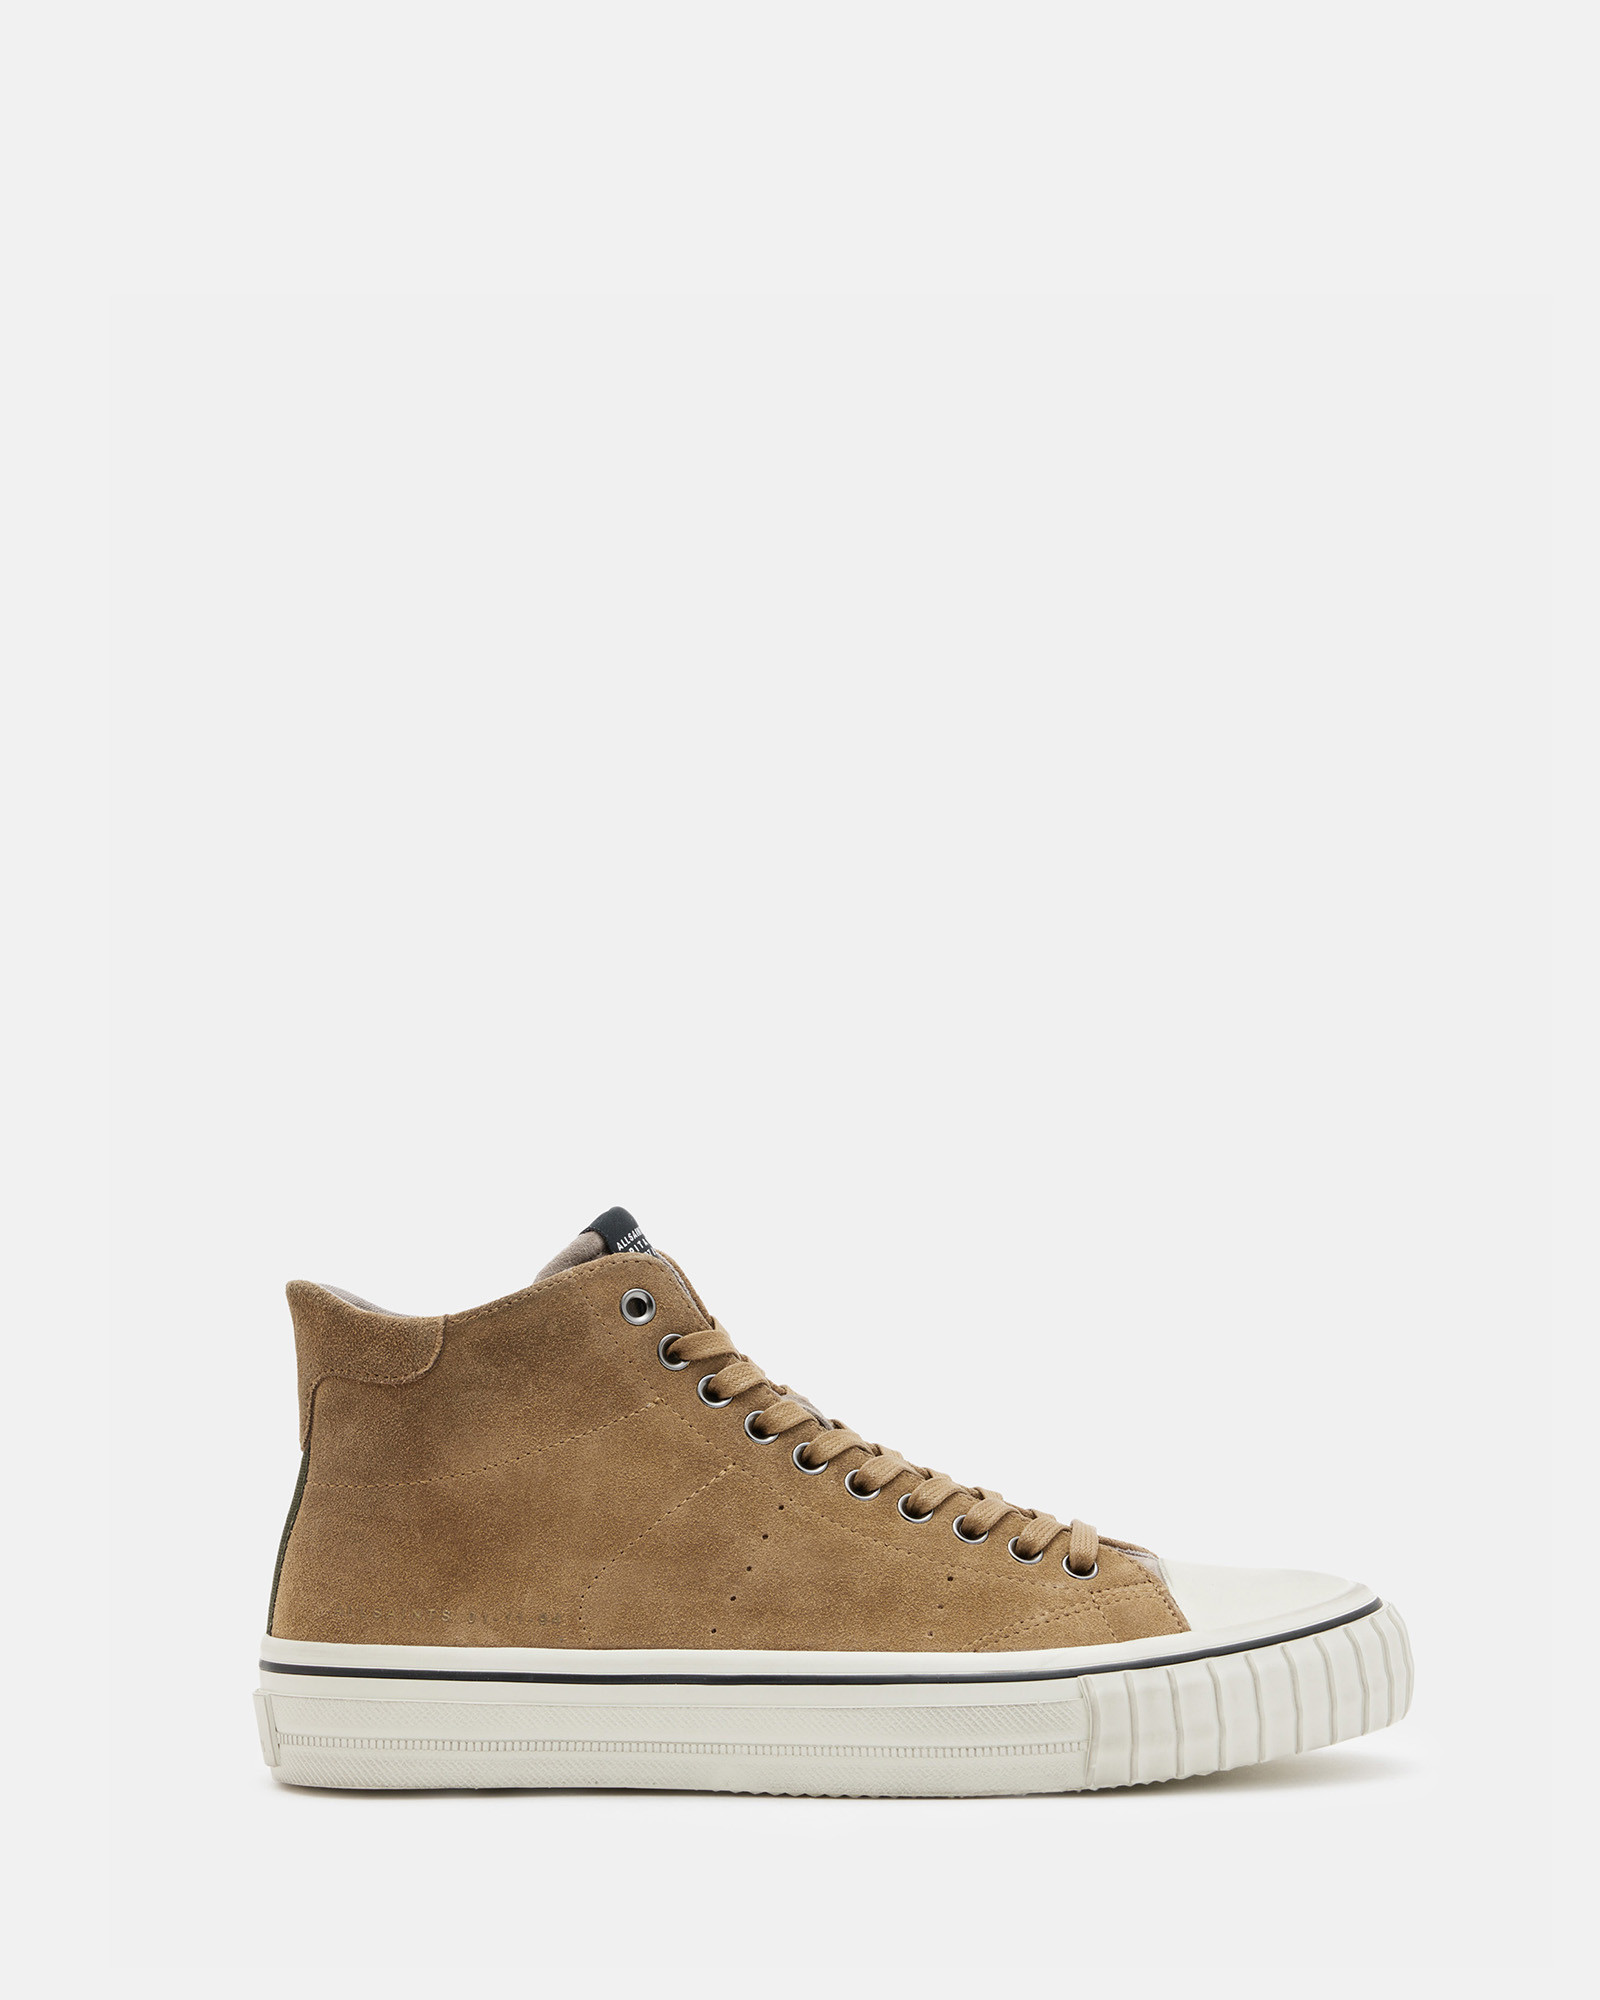 AllSaints Lewis Lace Up Leather High Top Trainers